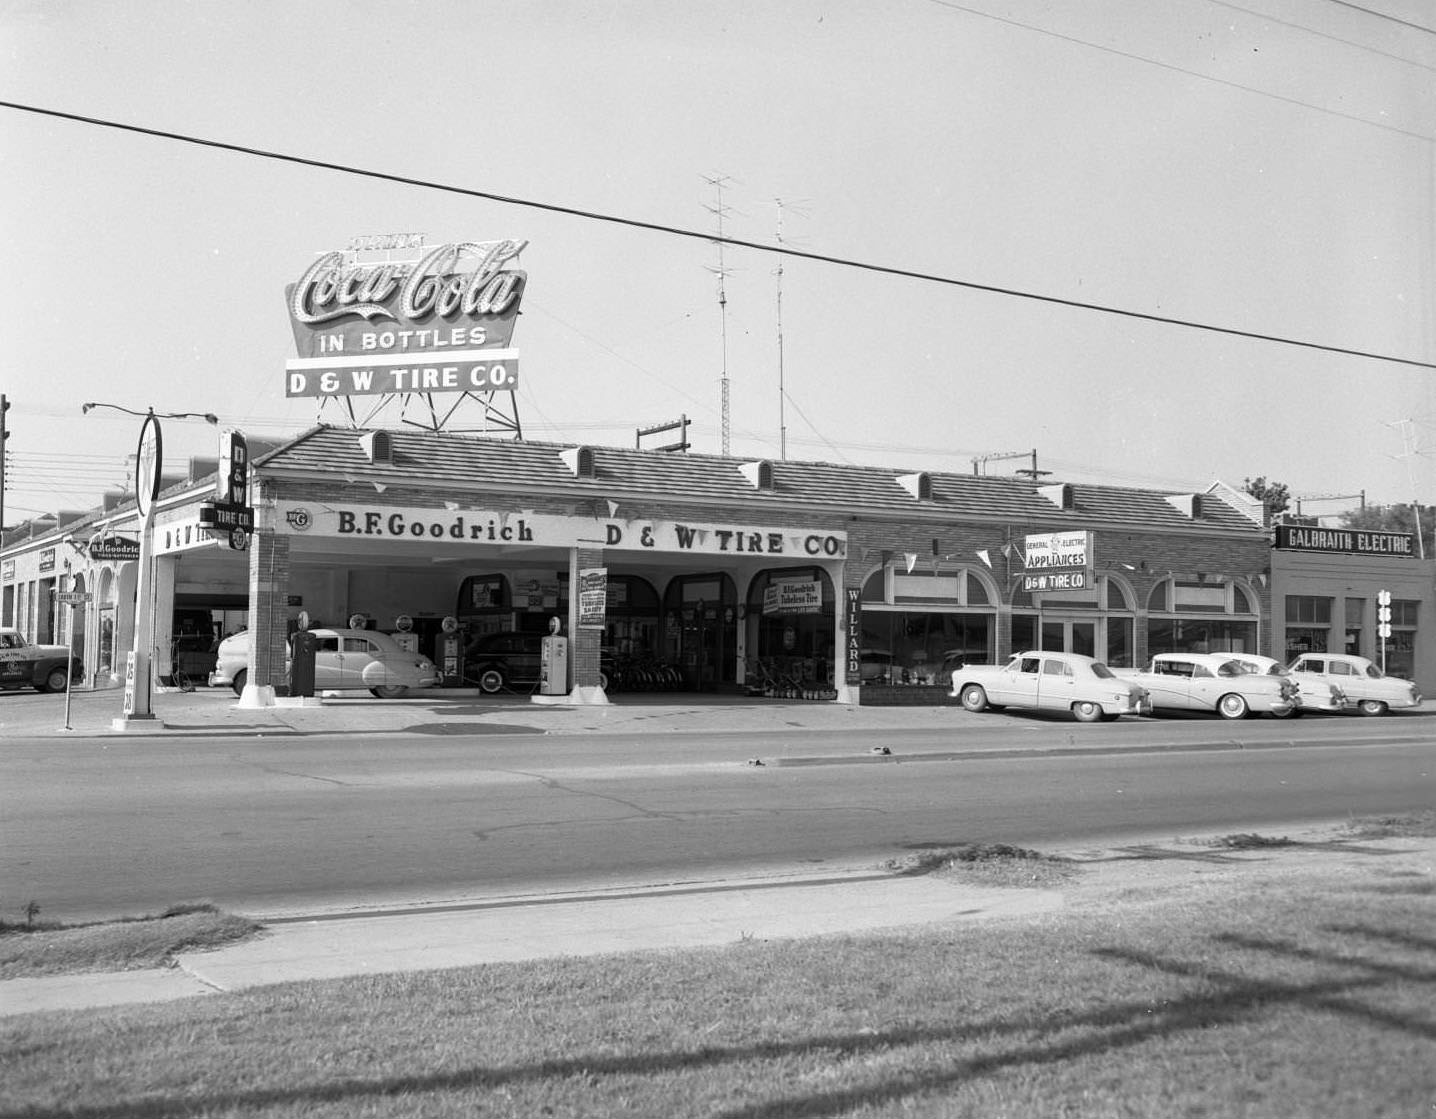 The D and W Tire Company, 1956. There are a few cars parked in front of the store and one car appears to be getting serviced. Galbraith Electric is next to the store.